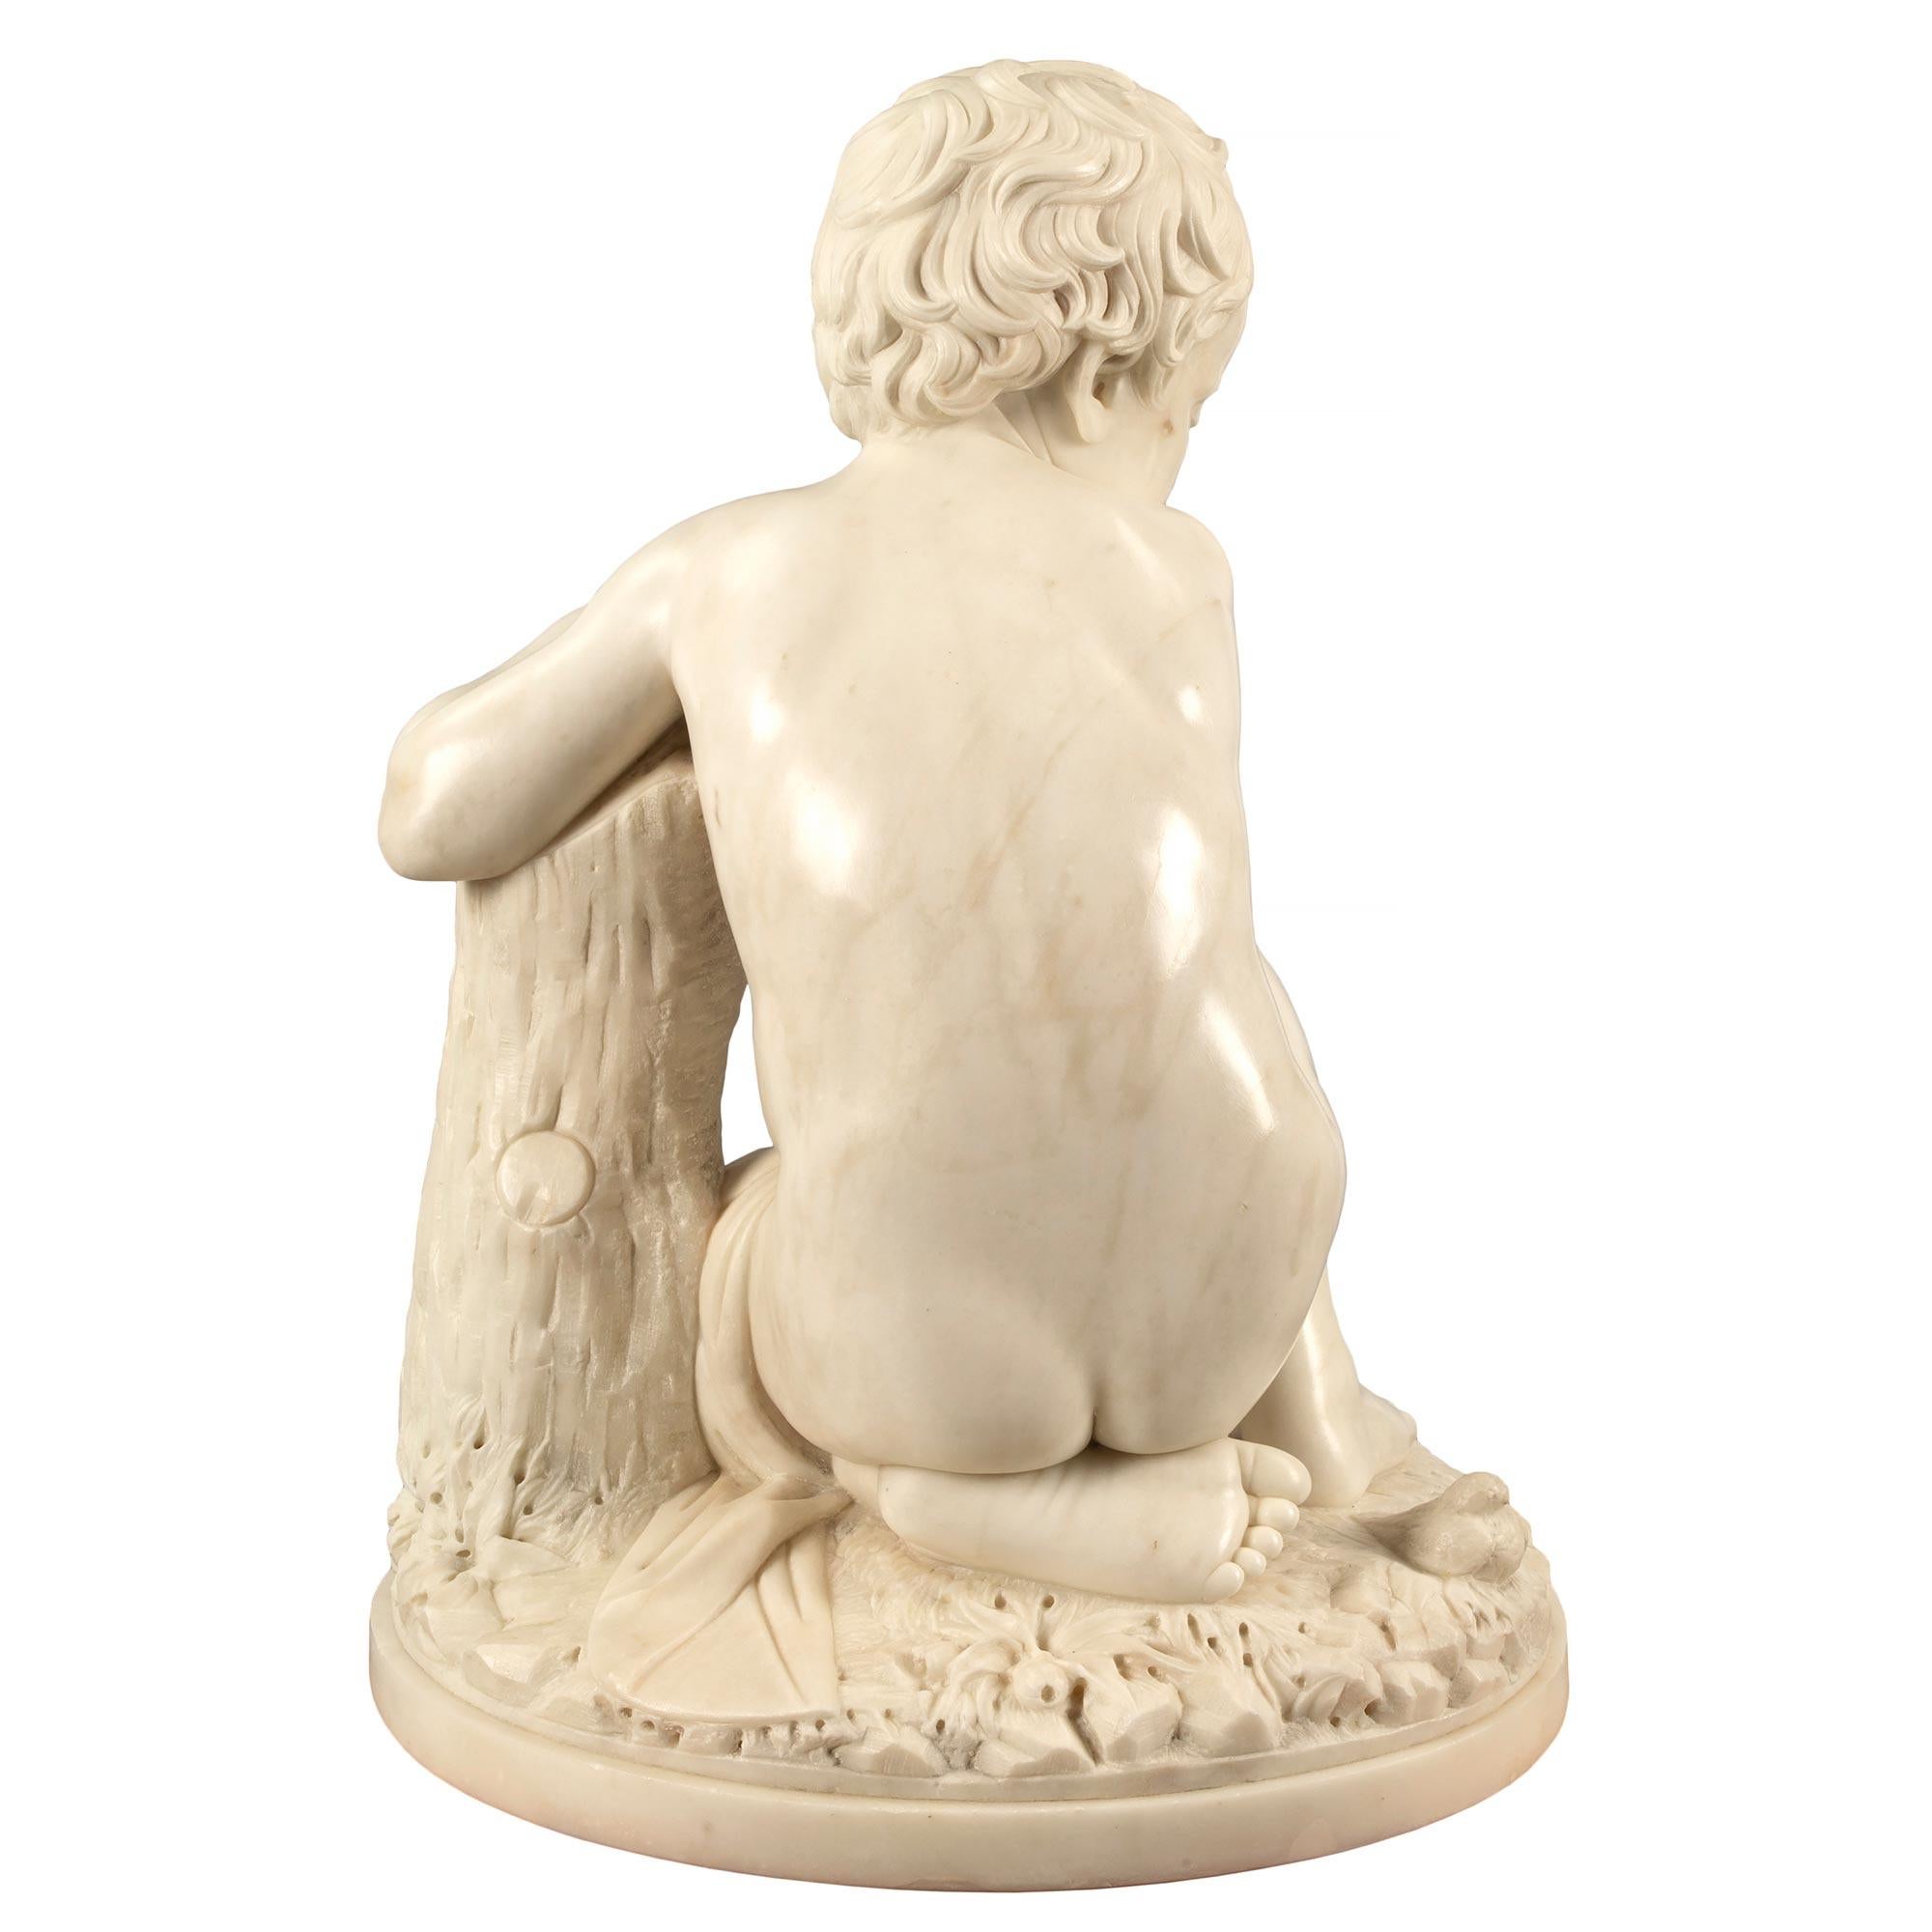 Italian 19th Century White Carrara Marble Signed Statue of a Young Boy For Sale 1